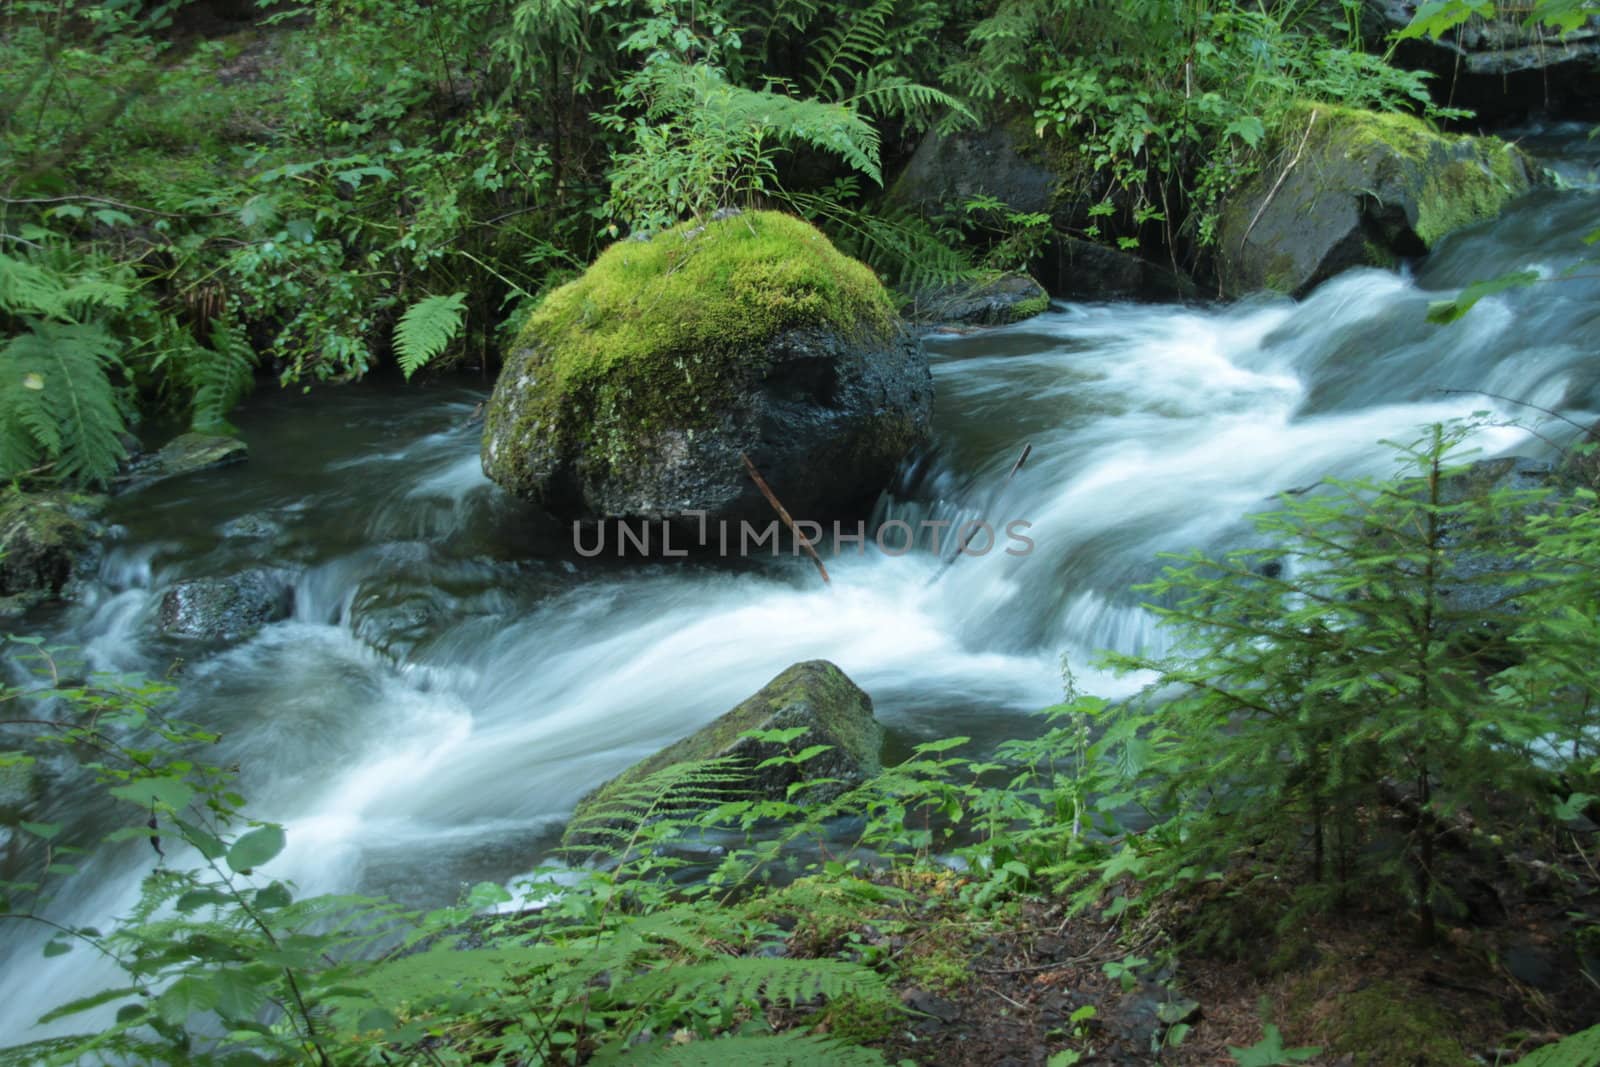 A water-course with long exposure in a rich planted environment